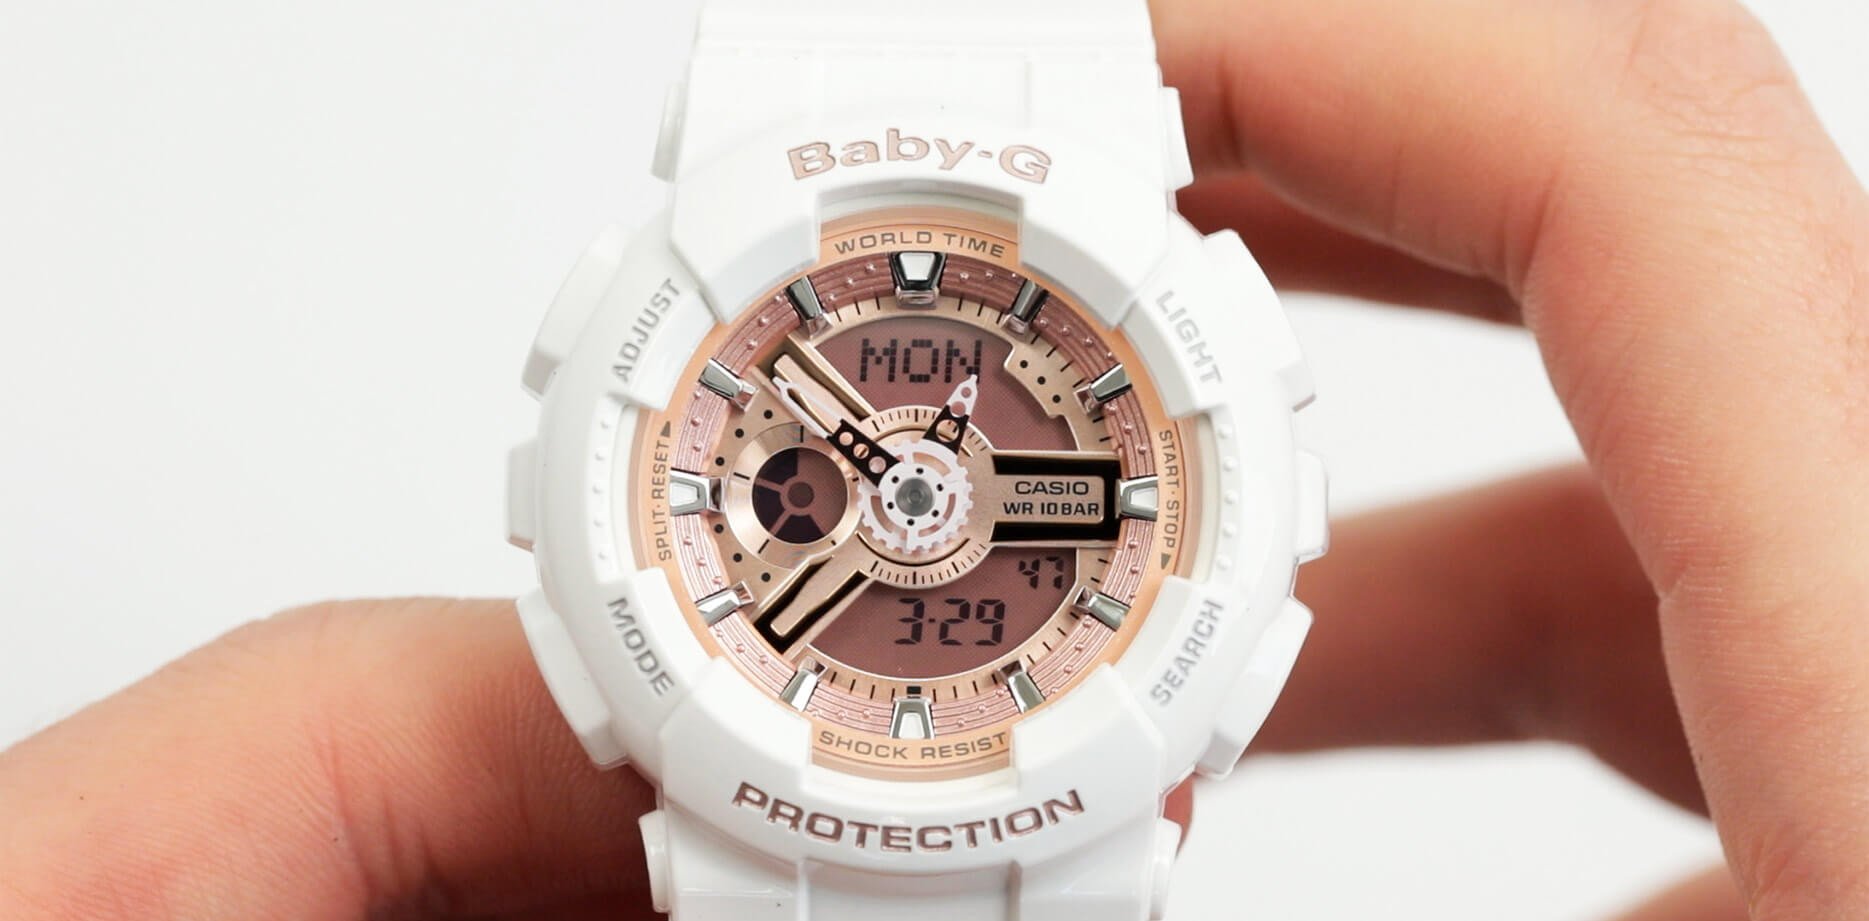 How To Change Time On A Baby-G Watch